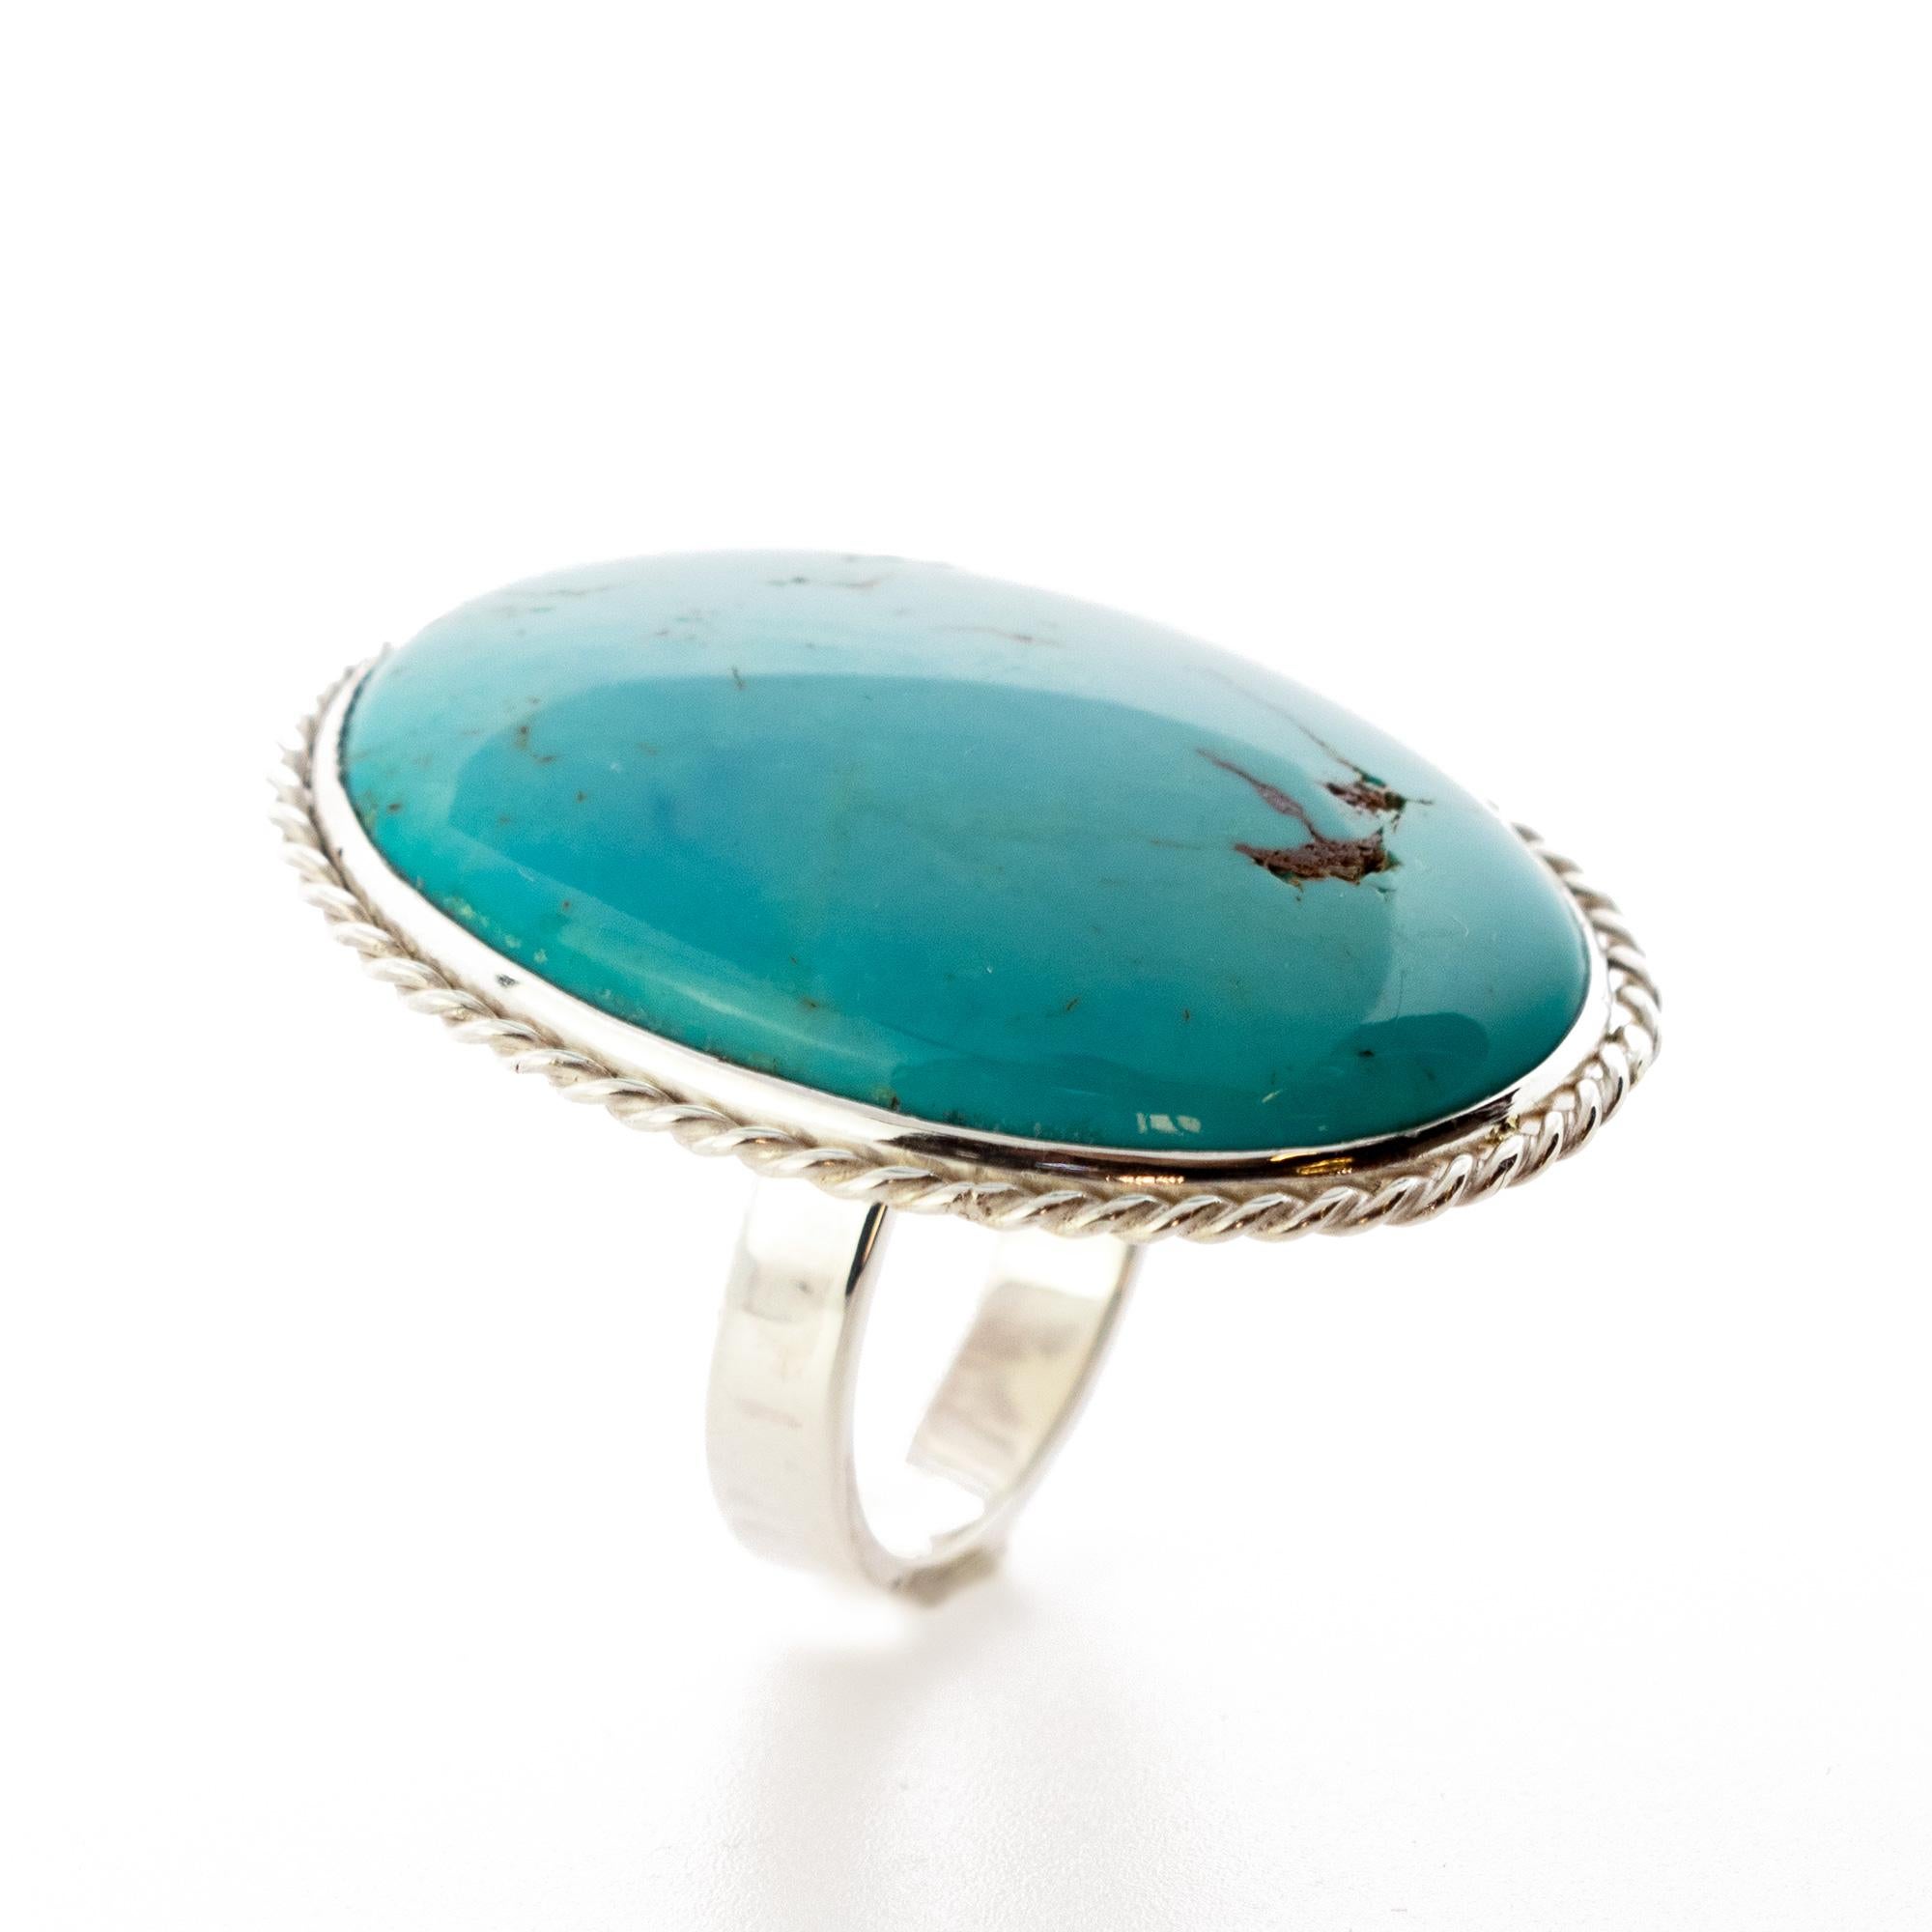 Oval Cut Natural Persian Turquoise 925 Sterling Silver Bezel Oval Cocktail Intini Ring For Sale